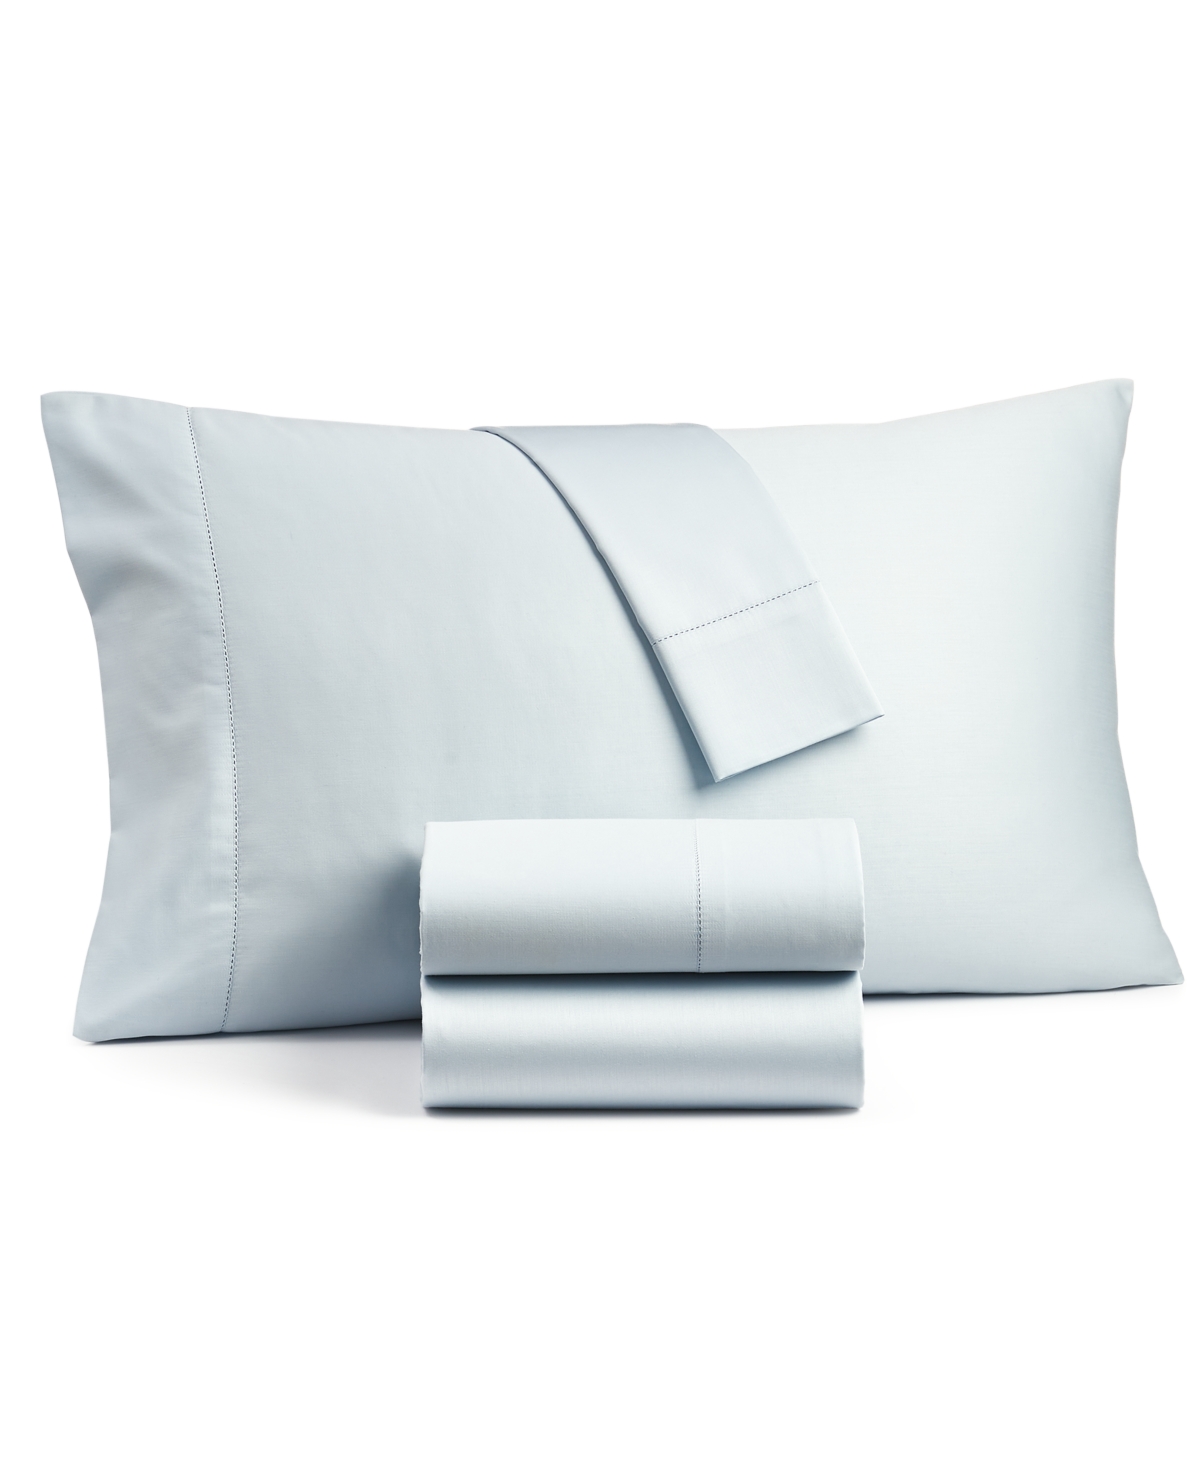 CHARTER CLUB DAMASK SOLID 550 THREAD COUNT 100% COTTON 4-PC. SHEET SET, KING, CREATED FOR MACY'S